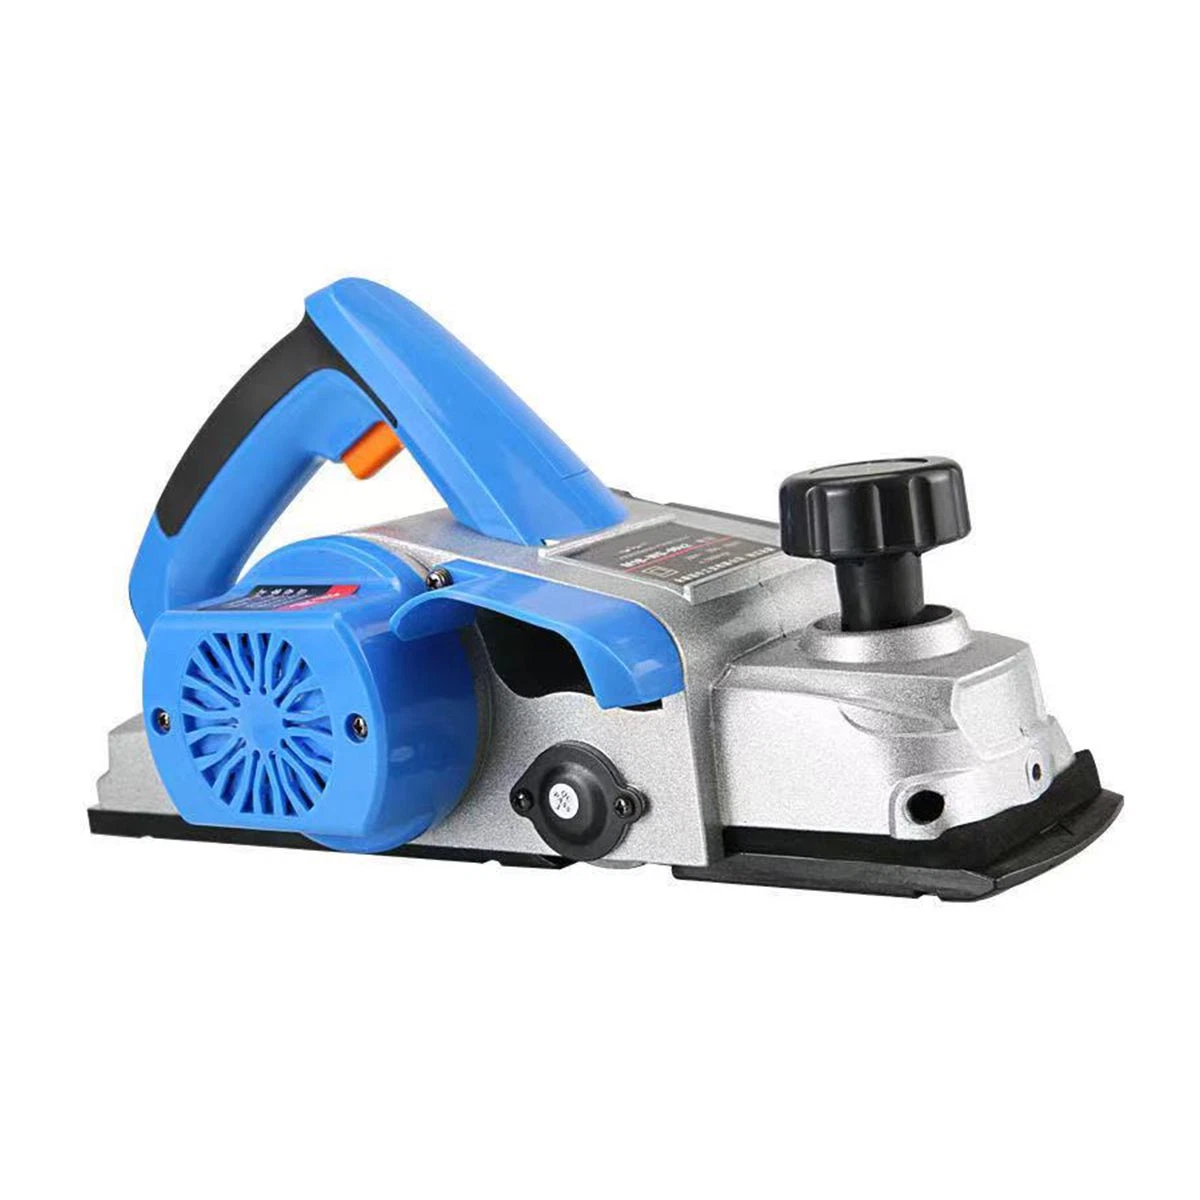 Hot Selling 220V 16500 R/Min Electric Wood Working Planer